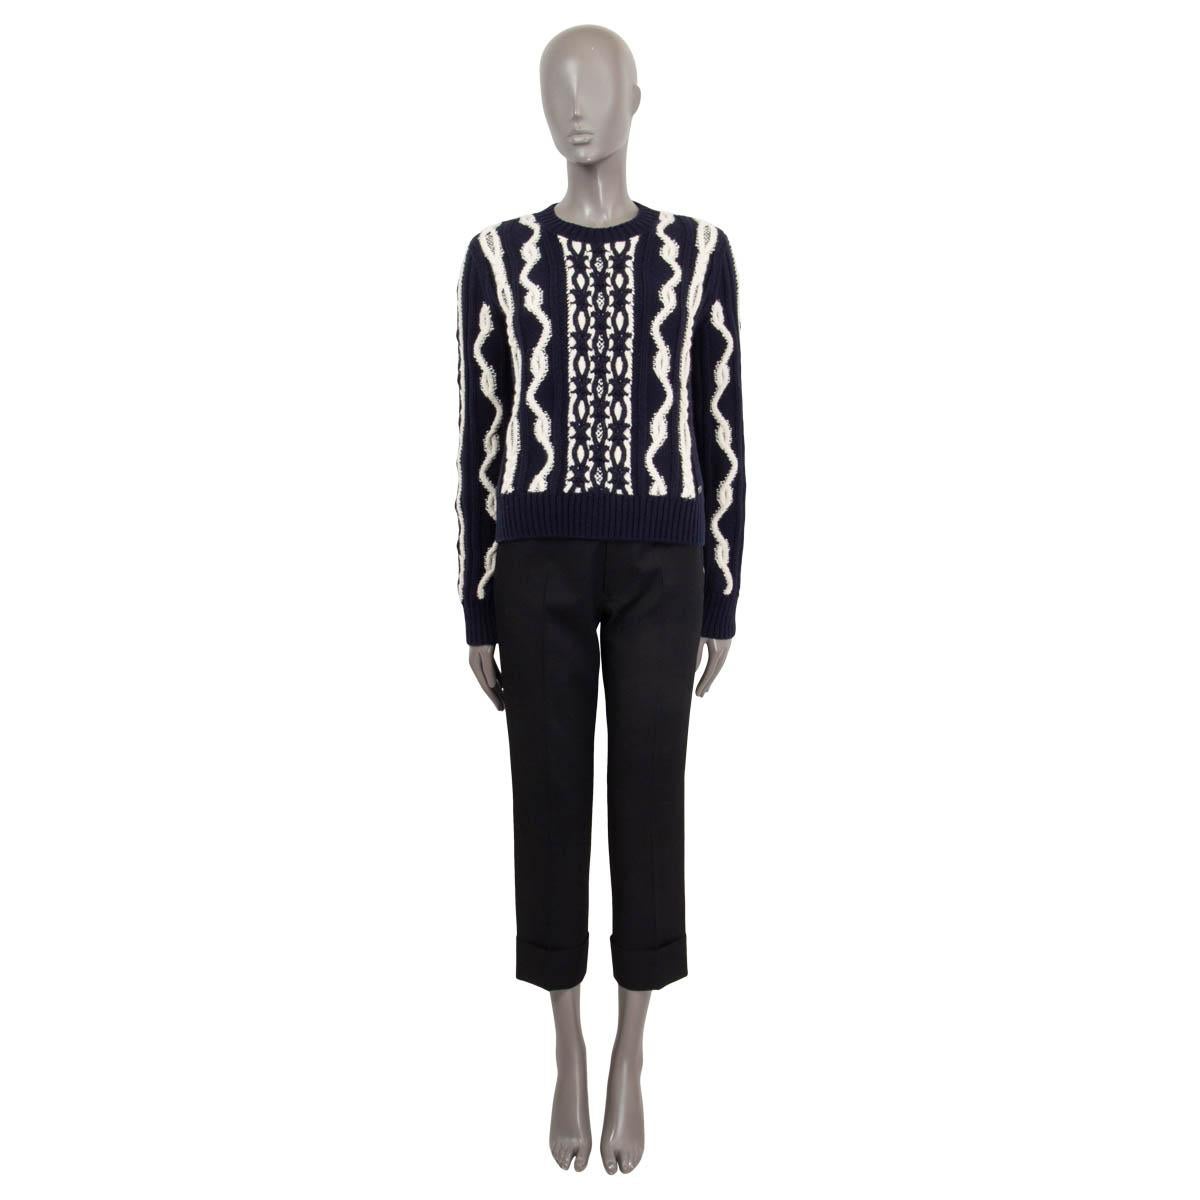 100% authentic Chanel 2018 Hamburg chunky knit sweater in navy and off-white wool (69%), cashmere (30%) and polyamide (1%). Features long sleeves, a 'CC' emblem on the front and lurex details. Unlined. Has been worn and is in excellent condition.